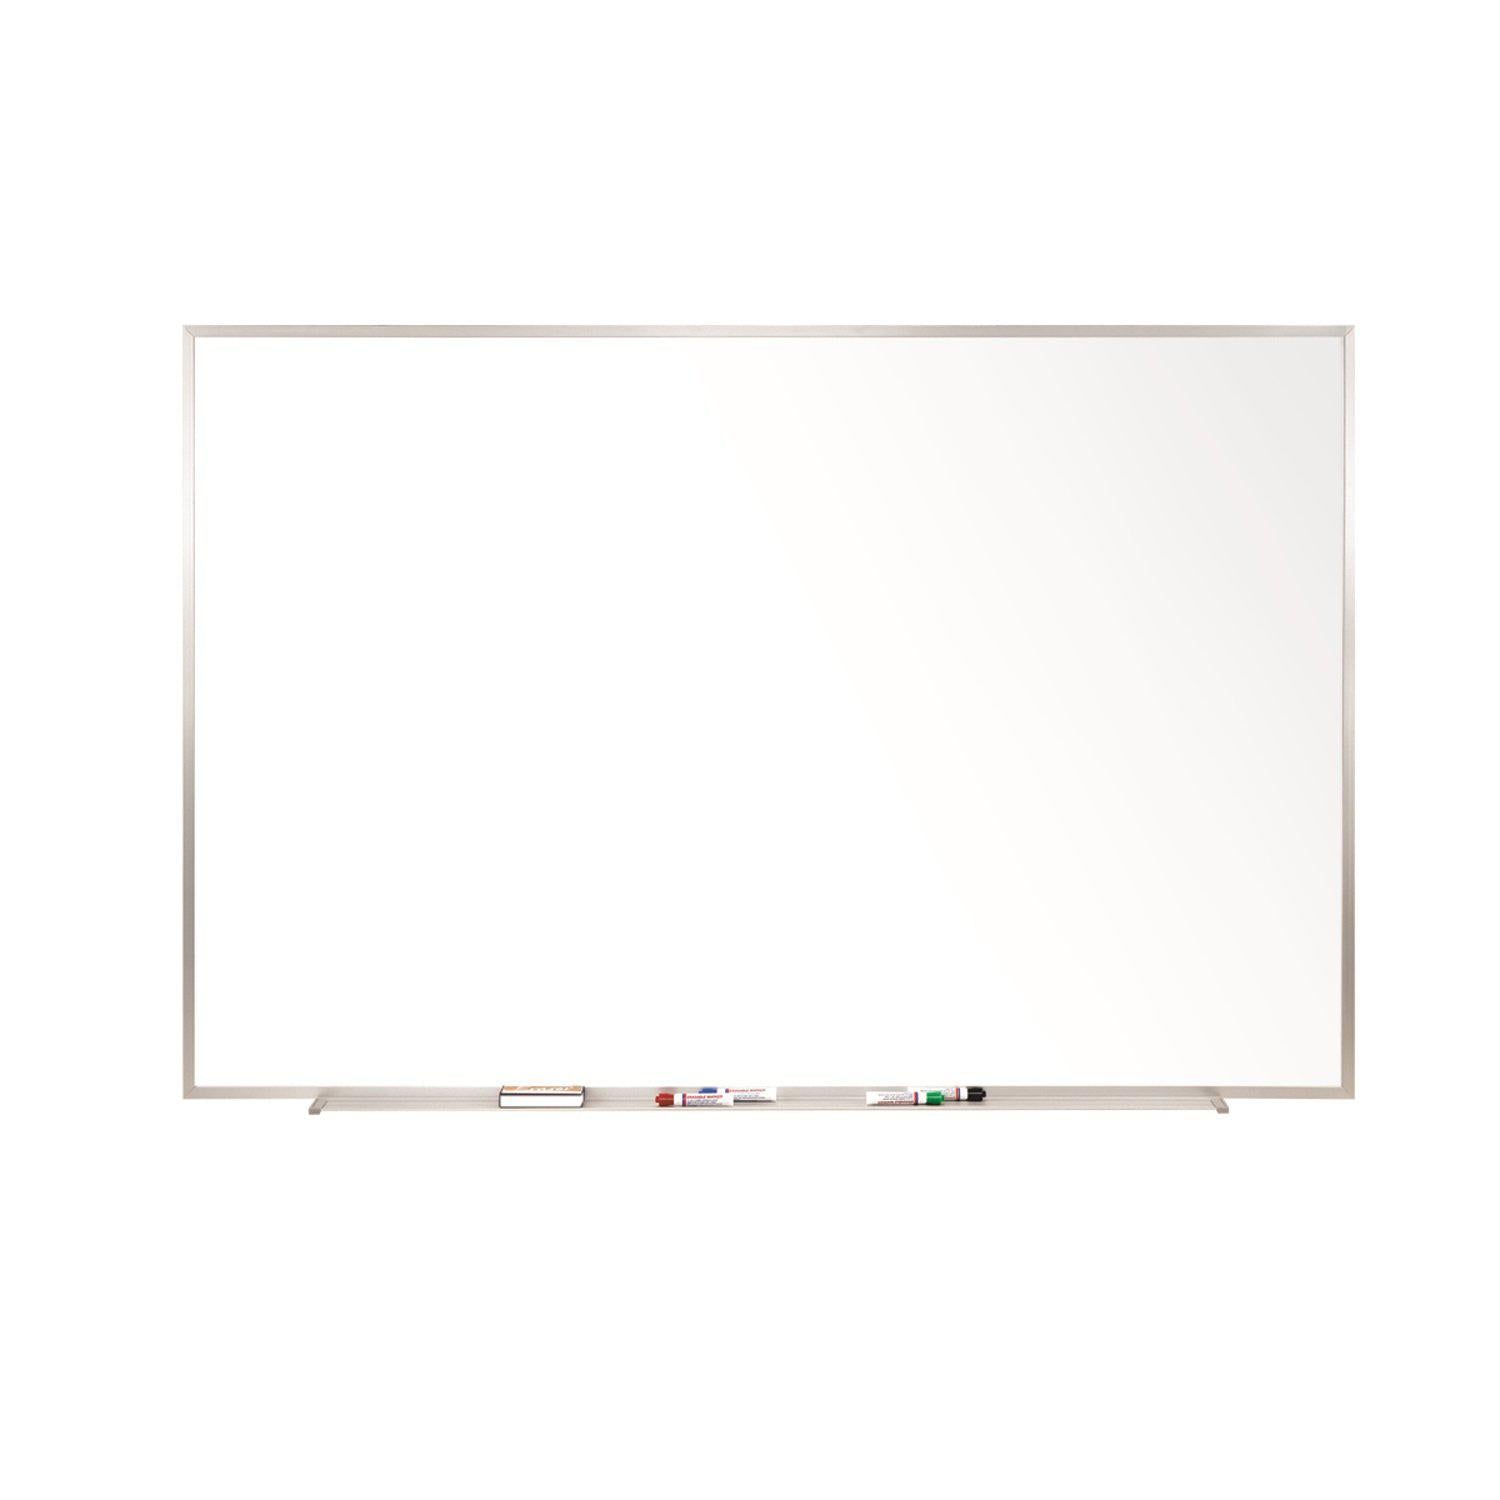 Magnetic Porcelain Whiteboard with Detachable Marker Tray, Satin Aluminum Frame, 2' H x 3' W, LIFETIME WARRANTY